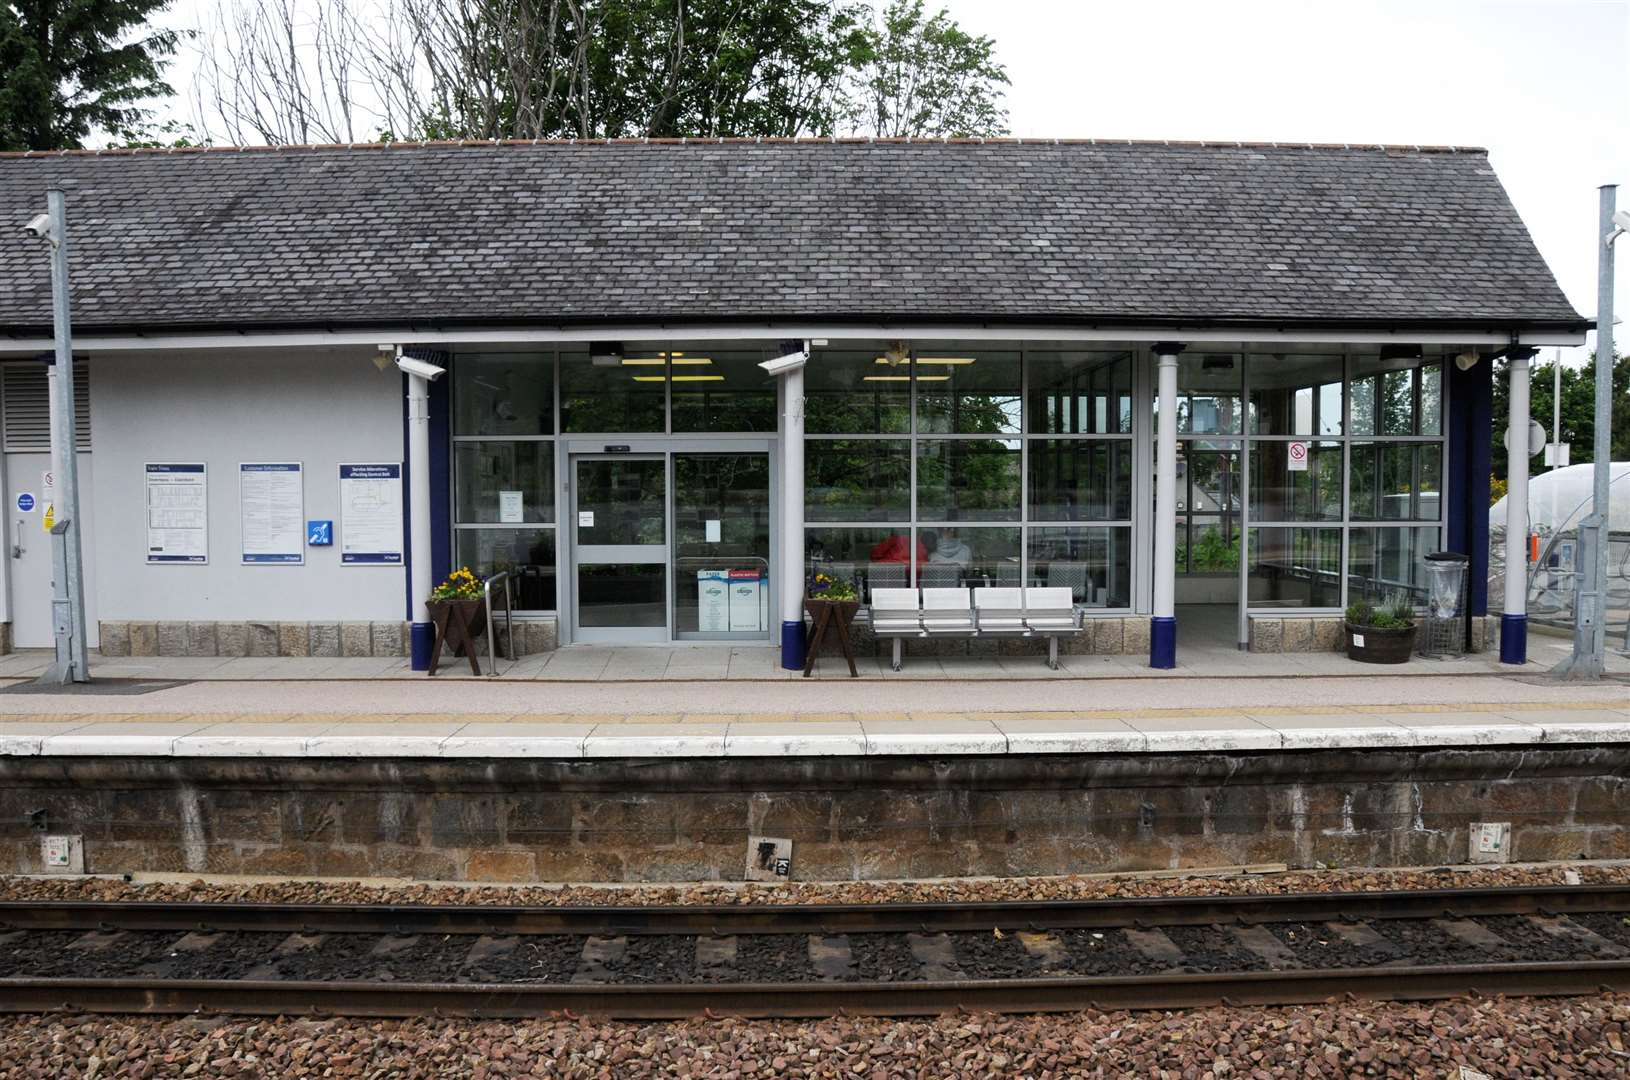 Reduced opening hours for the ticket office at Huntly station are proposed.